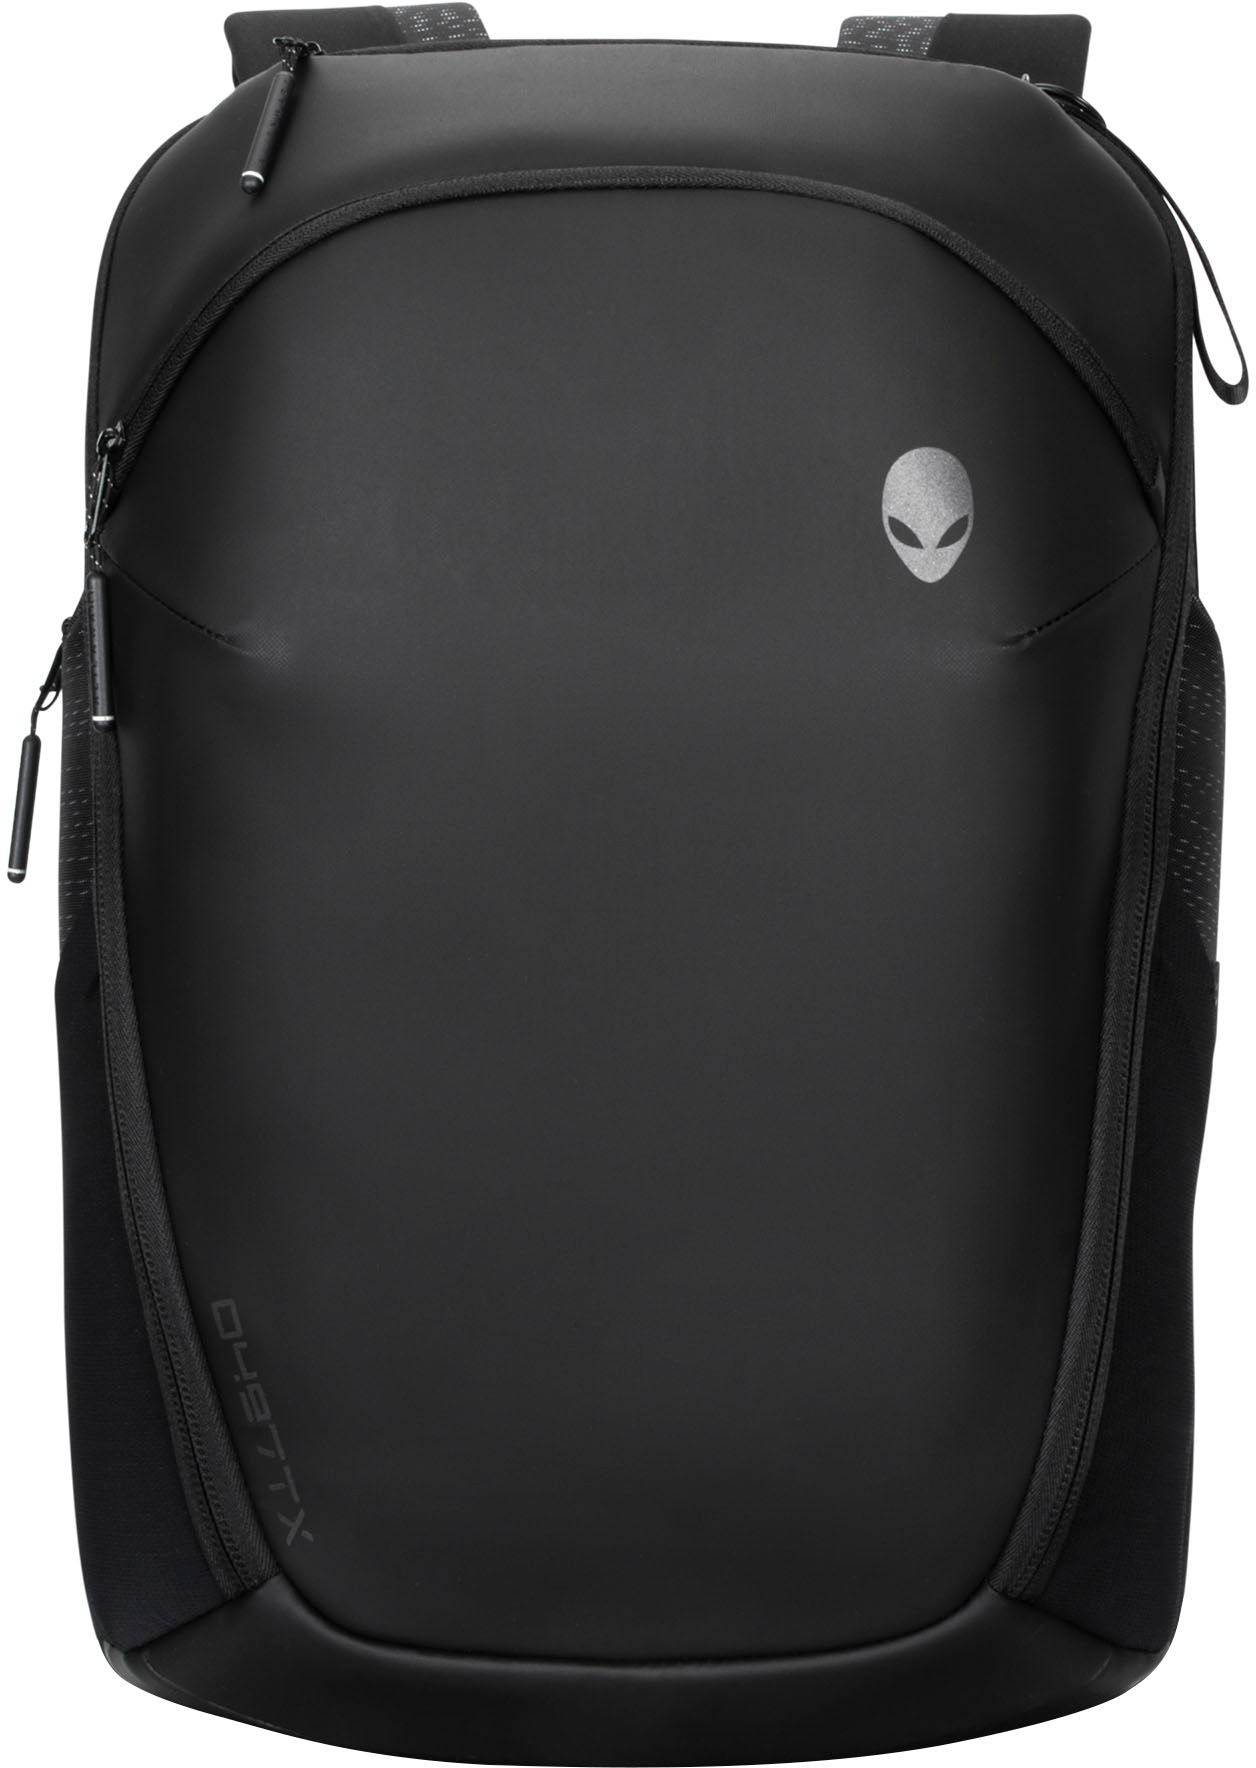 Angle View: Dell - Alienware Horizon Travel Backpack (Front pocket, 2 x side zippered pockets, 2 x side mesh pockets, small accessories) - GalaxyWeave Black